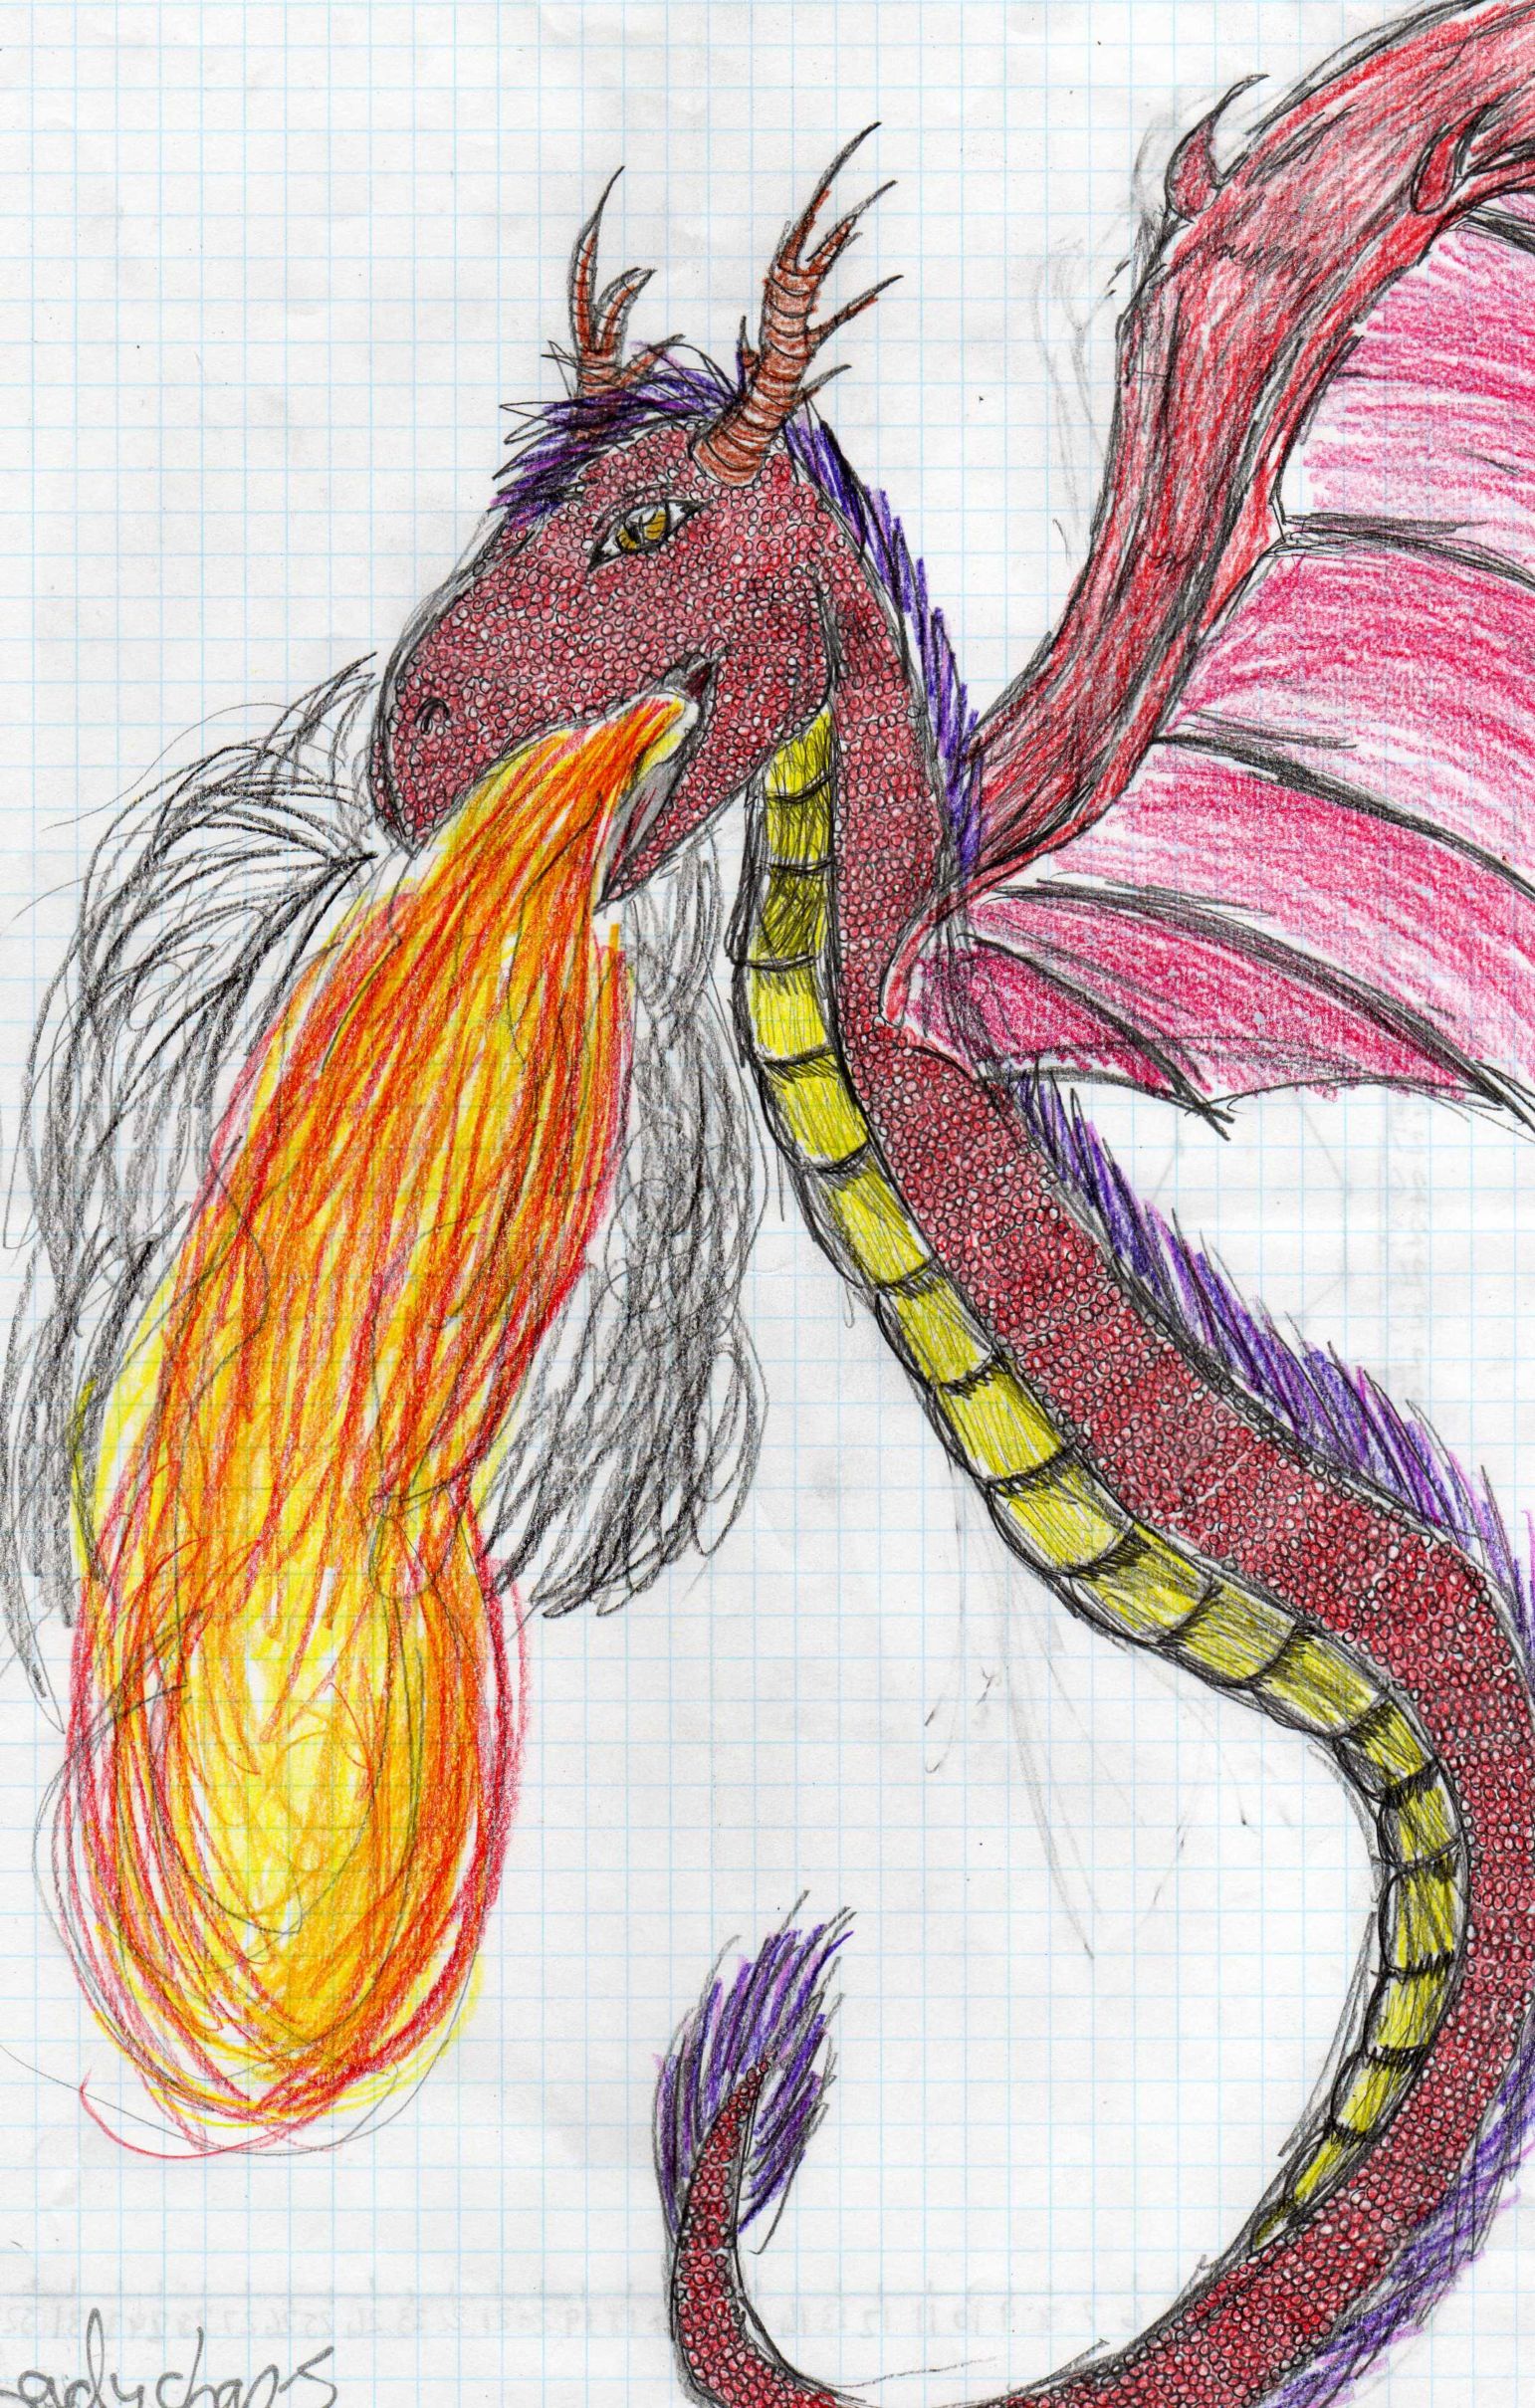 Fire Dragon for BadArtist by ladychaos